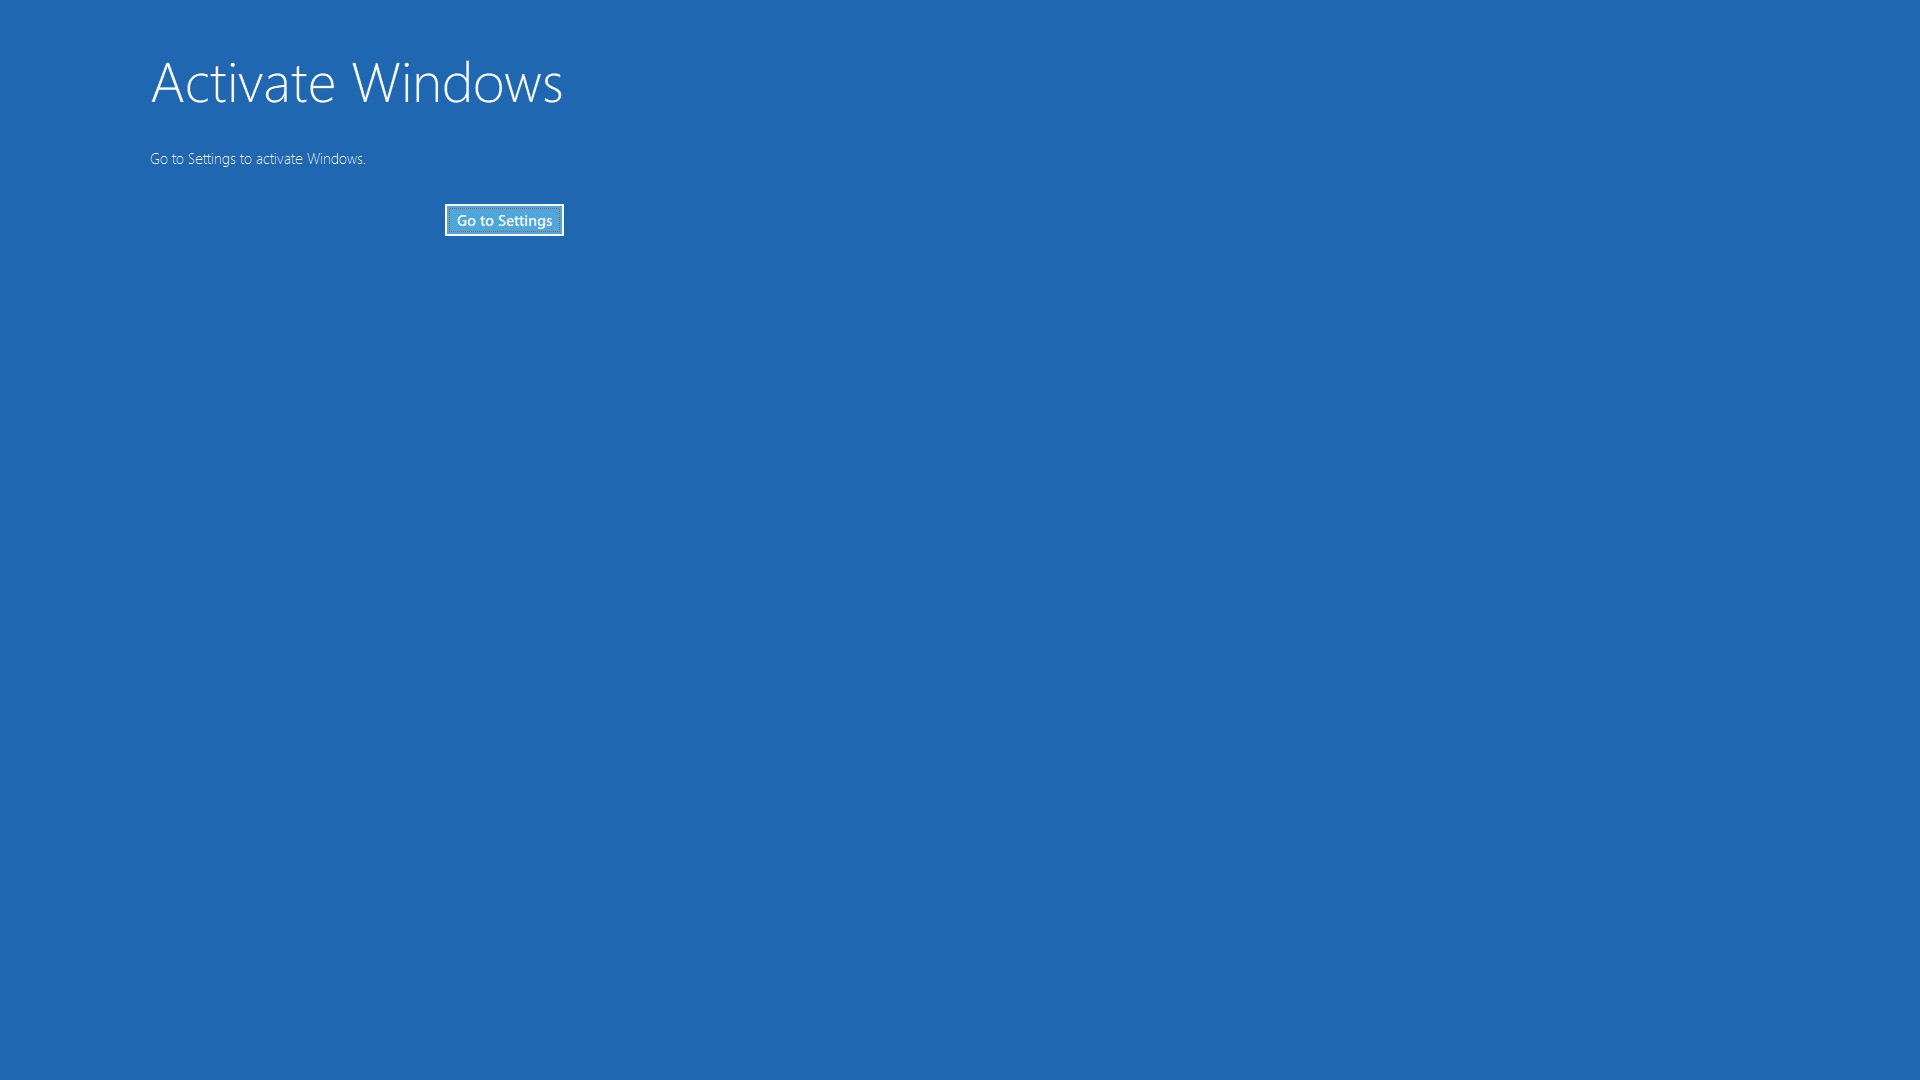 windows 10 activate windows watermark removal